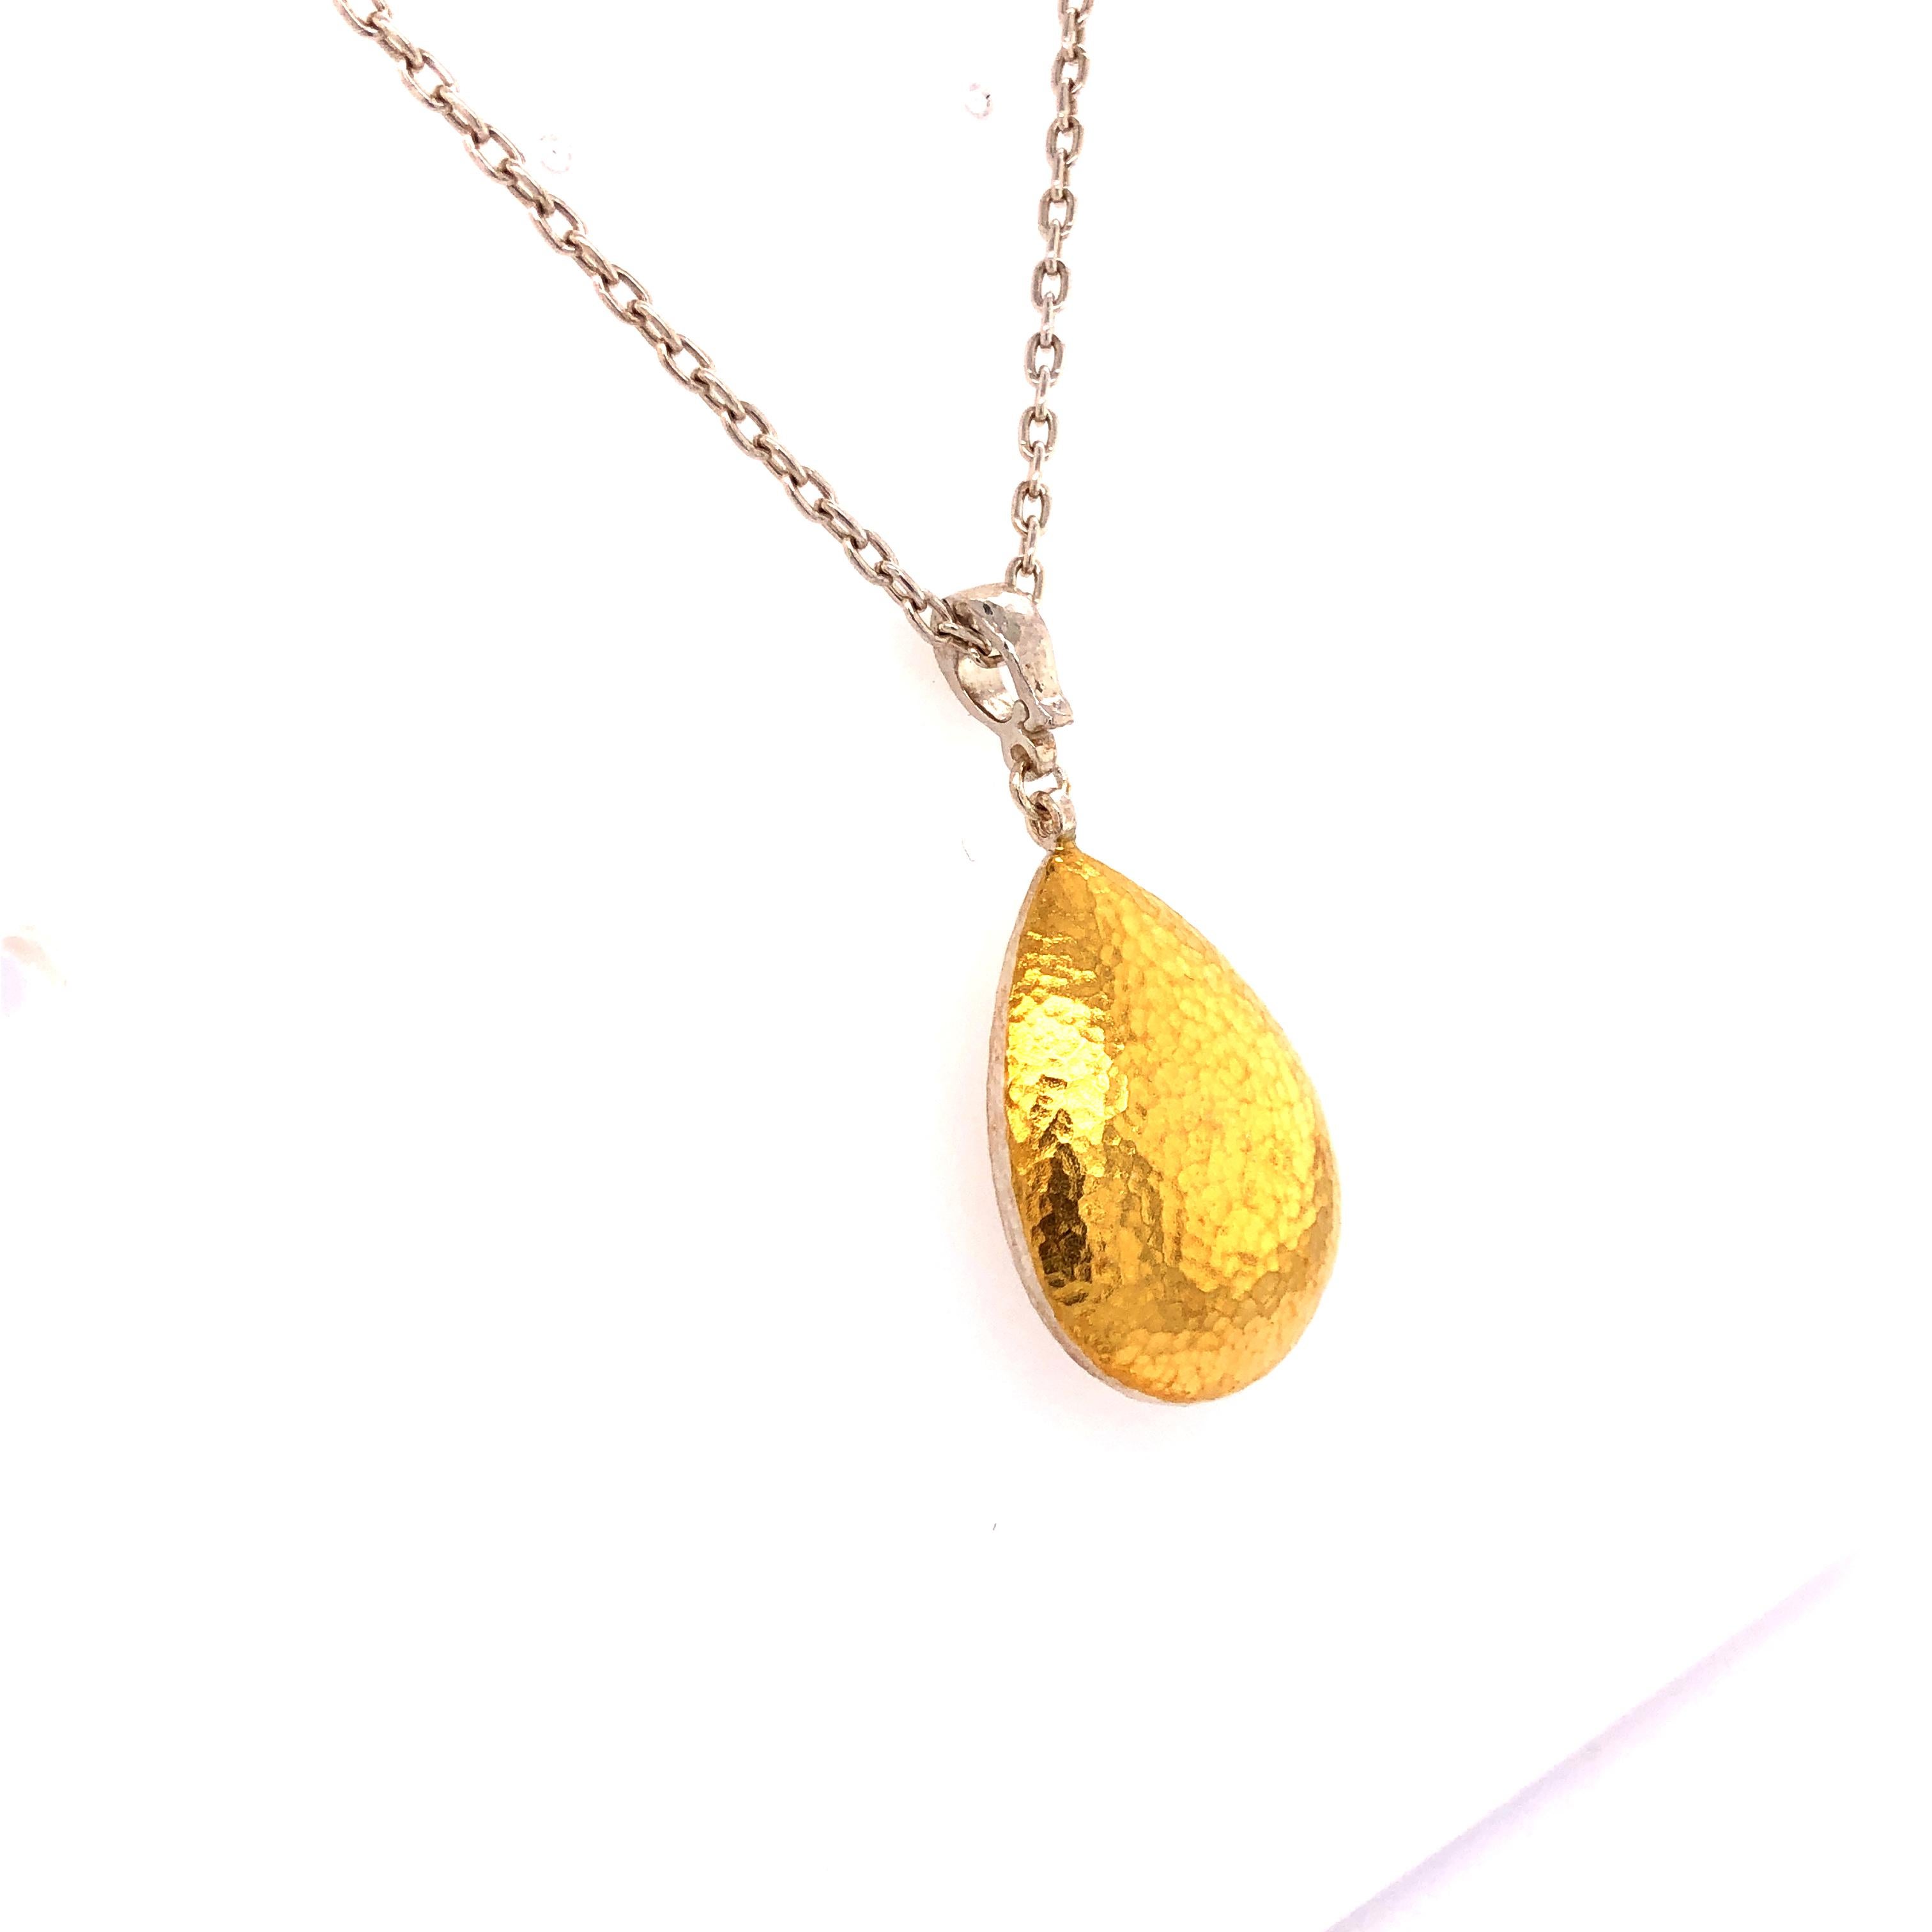  Sterling Silver & 24KY Pear Pendant In New Condition For Sale In Dallas, TX